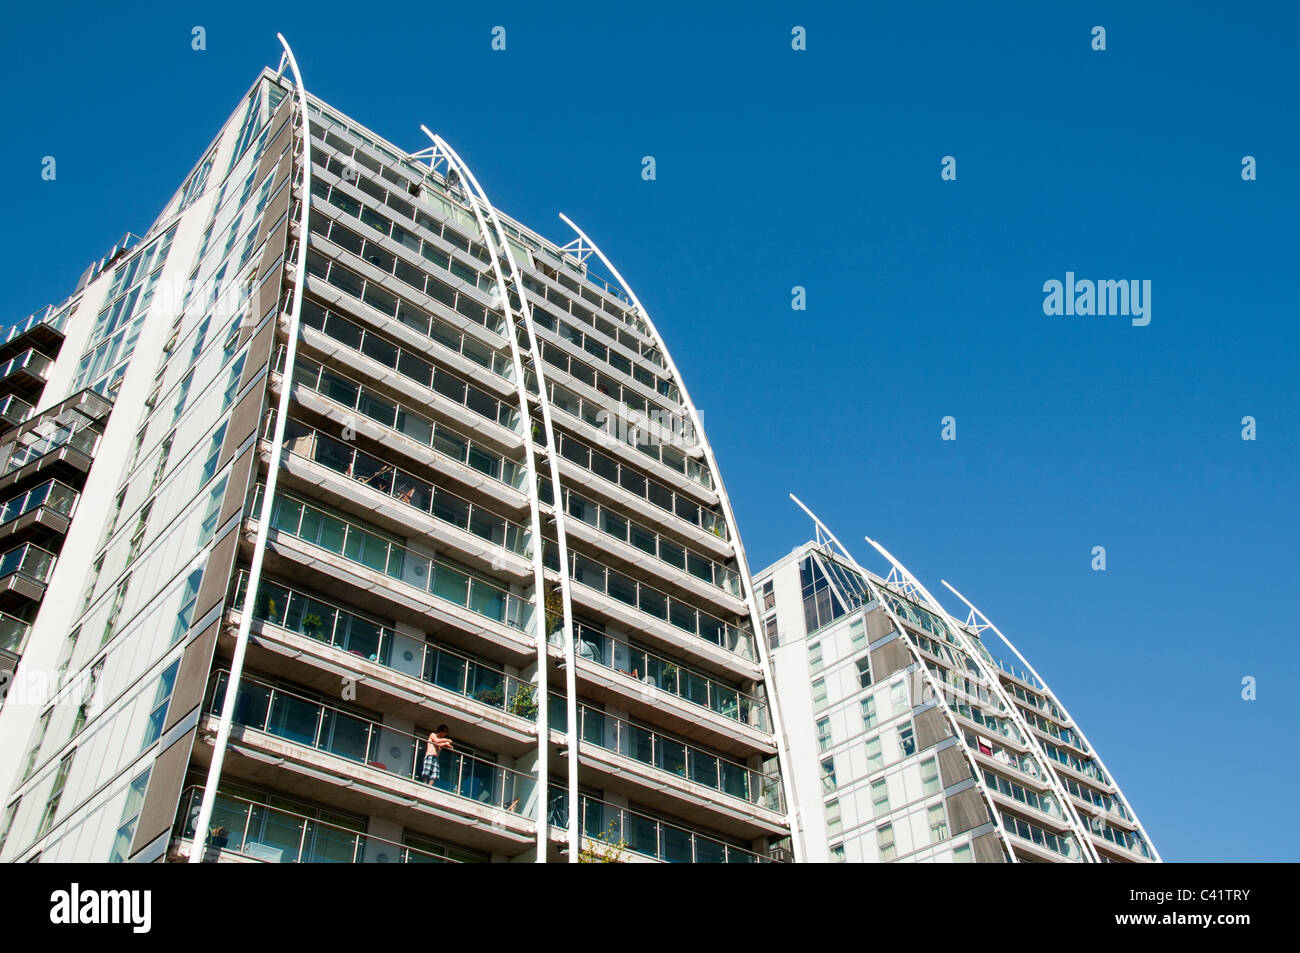 The NV Buildings apartment blocks, Huron Basin, Salford Quays, Greater Manchester, England, UK Stock Photo